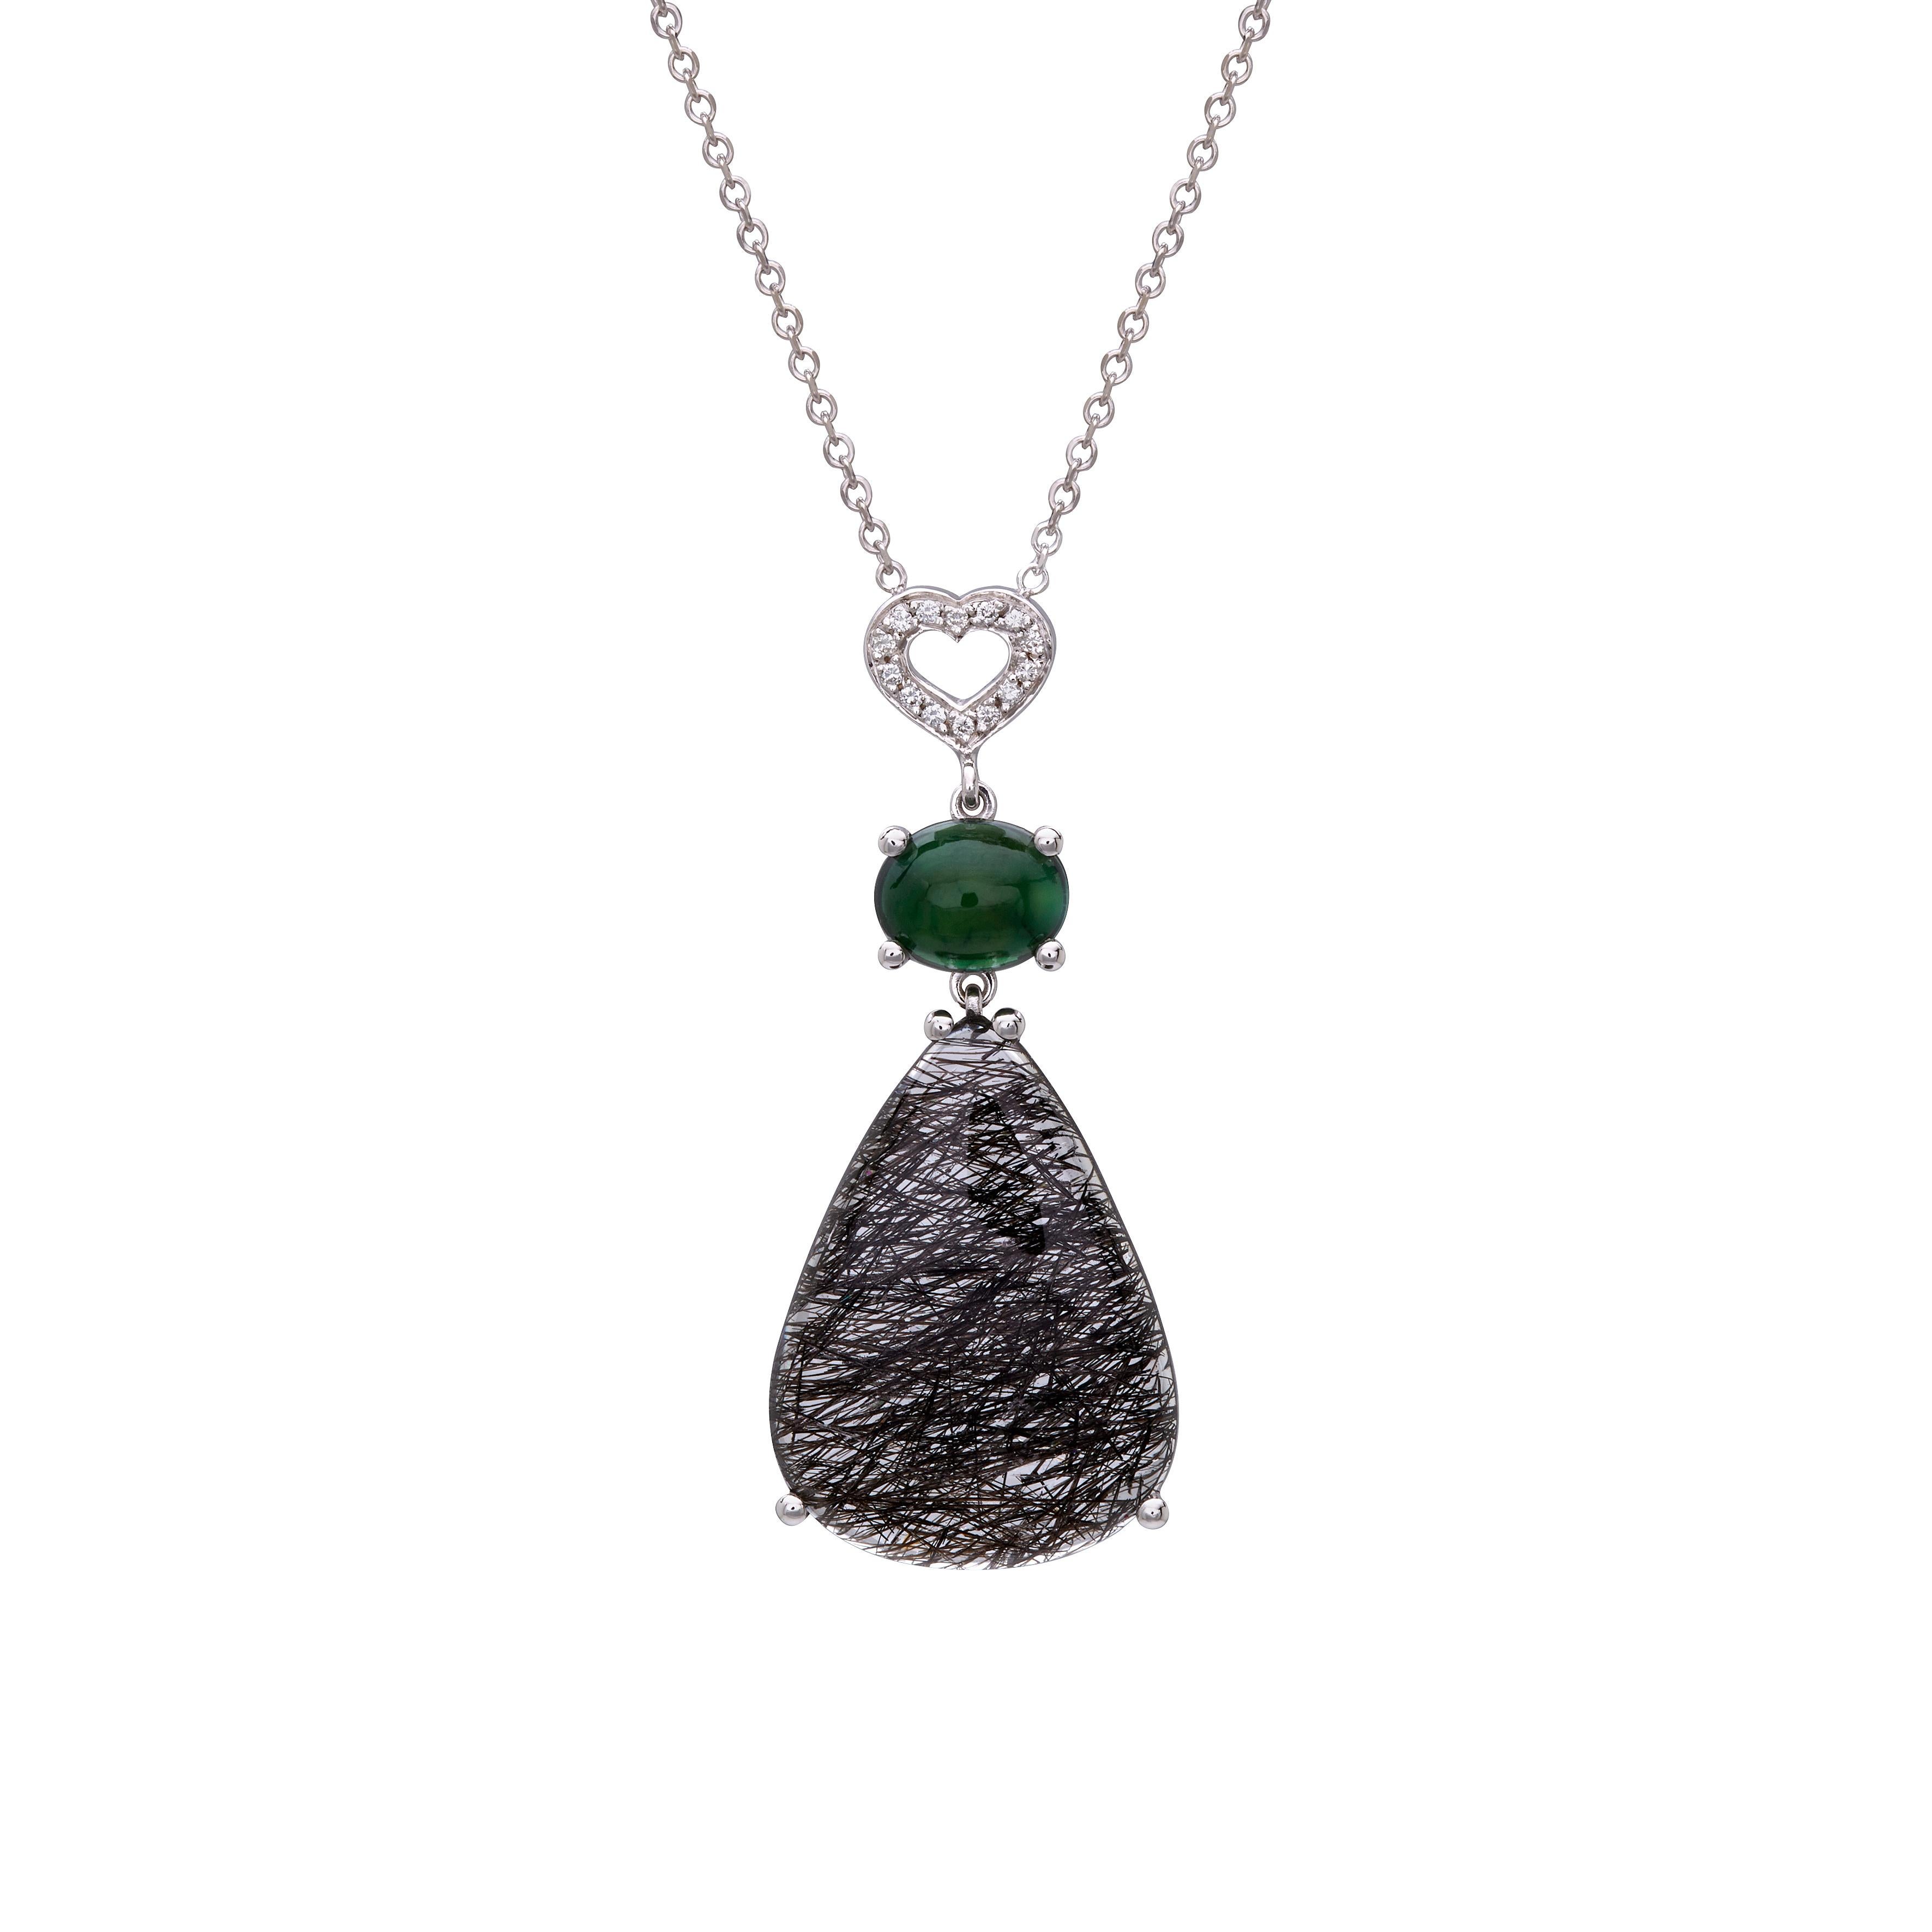 Beautiful and delicate, One of a kind,  Drop Heart Pendant Necklace in 18Kt white gold, handmade with diamonds, green opale and a rare quartz with inclusions. An exceptional piece of jewelry that gives a special sense to your style because matches